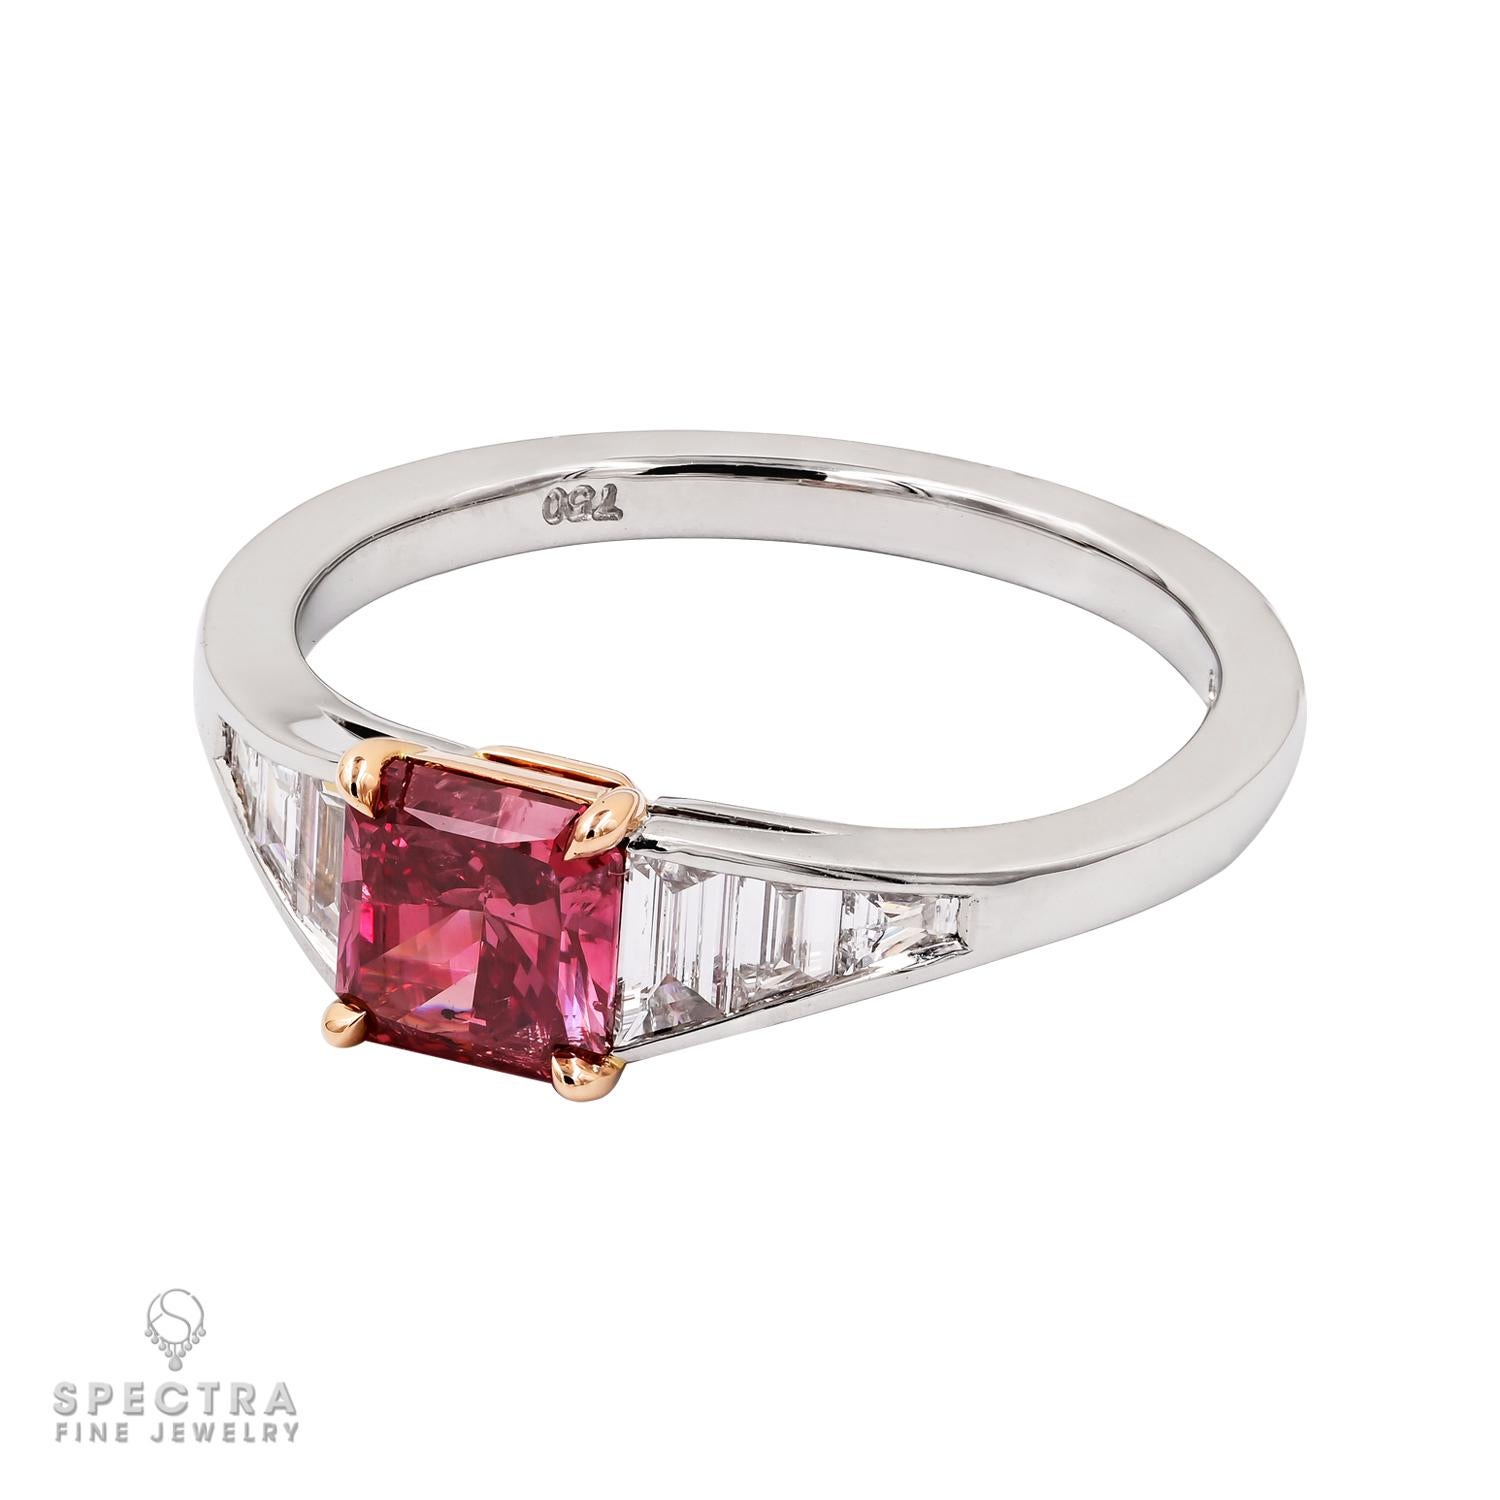 0.76ct Radiant Red Diamond Ring by Spectra Fine Jewelry, an exquisite testament to the extraordinary beauty of nature's rarest treasures. Graced by a resplendent 0.76ct RAD Fancy Red Diamond, accompanied by a prestigious GIA certificate, this ring